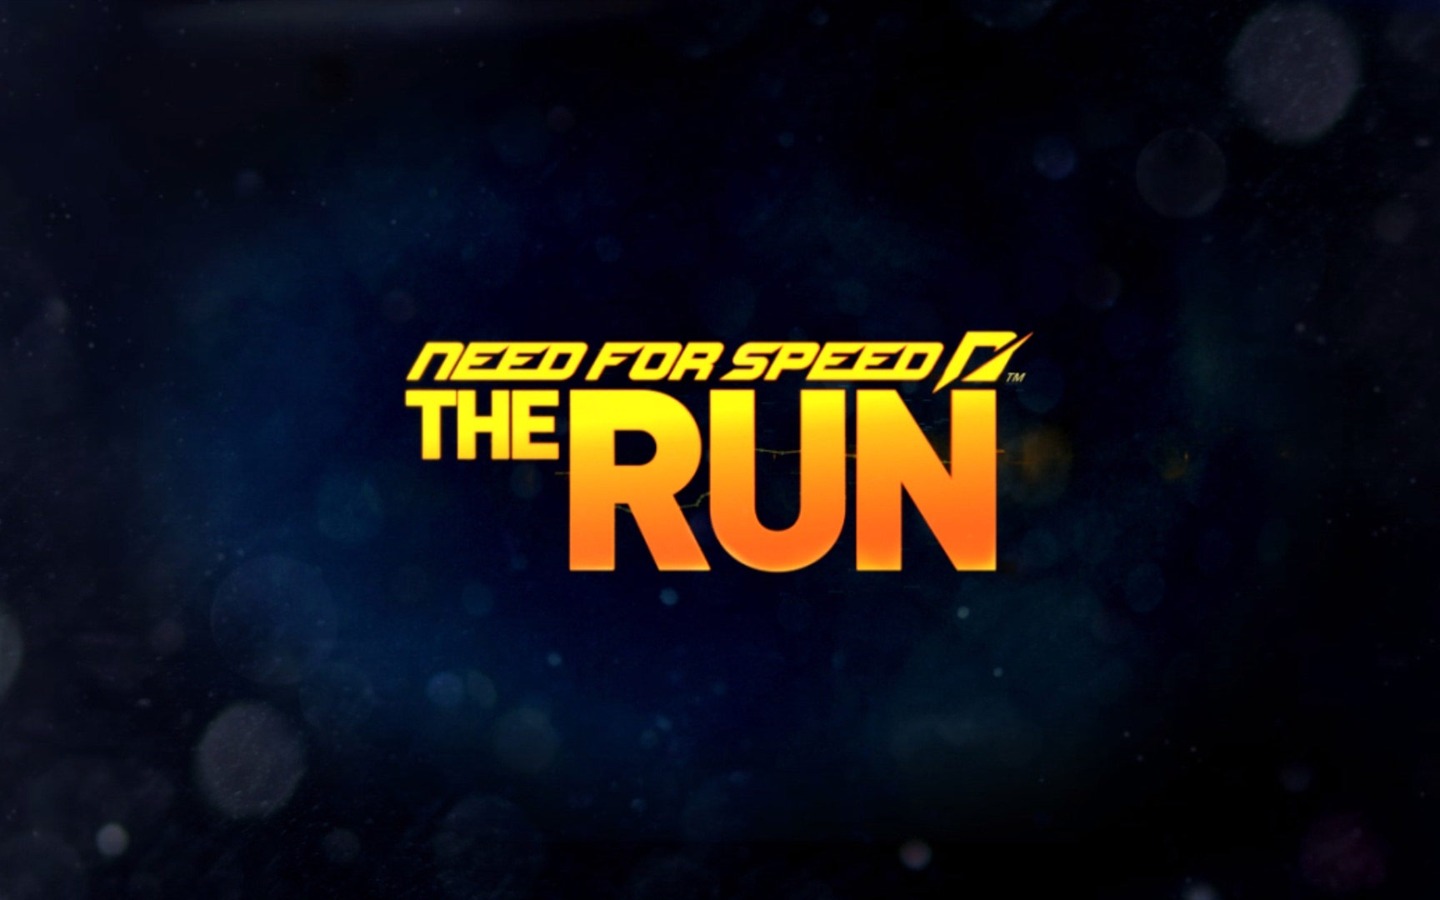 Need for Speed: The Run HD wallpapers #15 - 1440x900